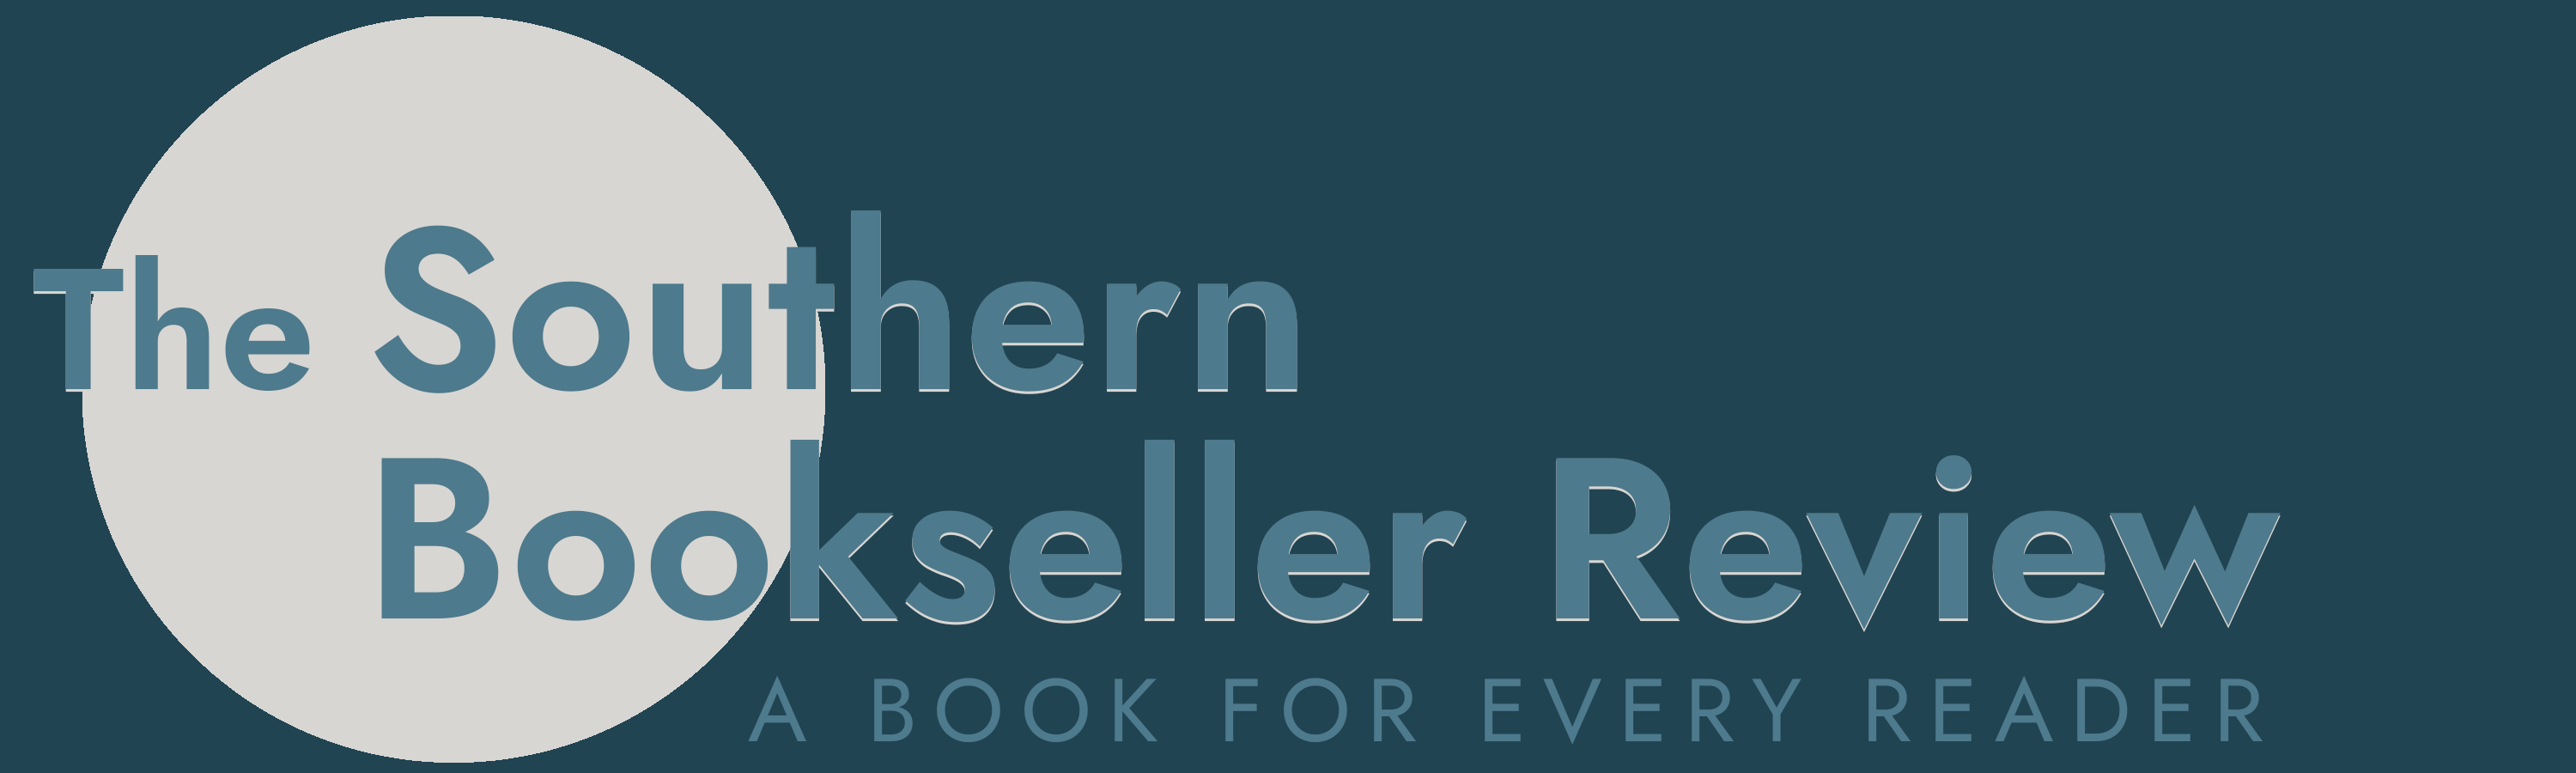 The Southern Bookseller Review: A Book for Every Reader